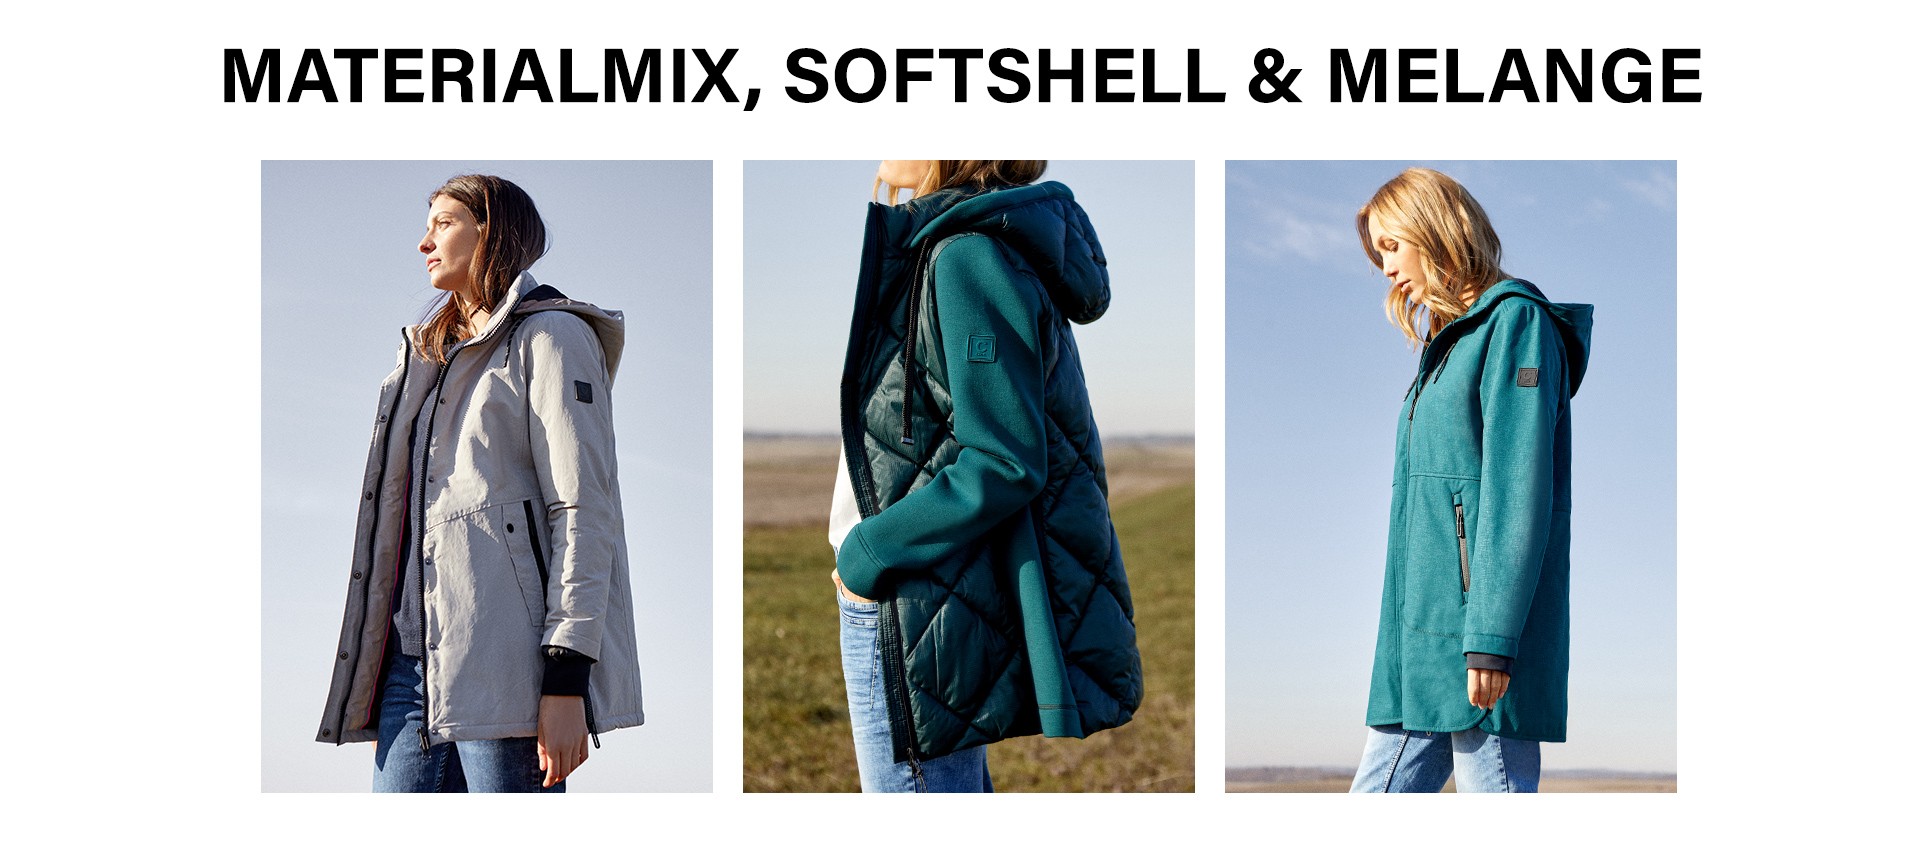 Materialmix & Softshell